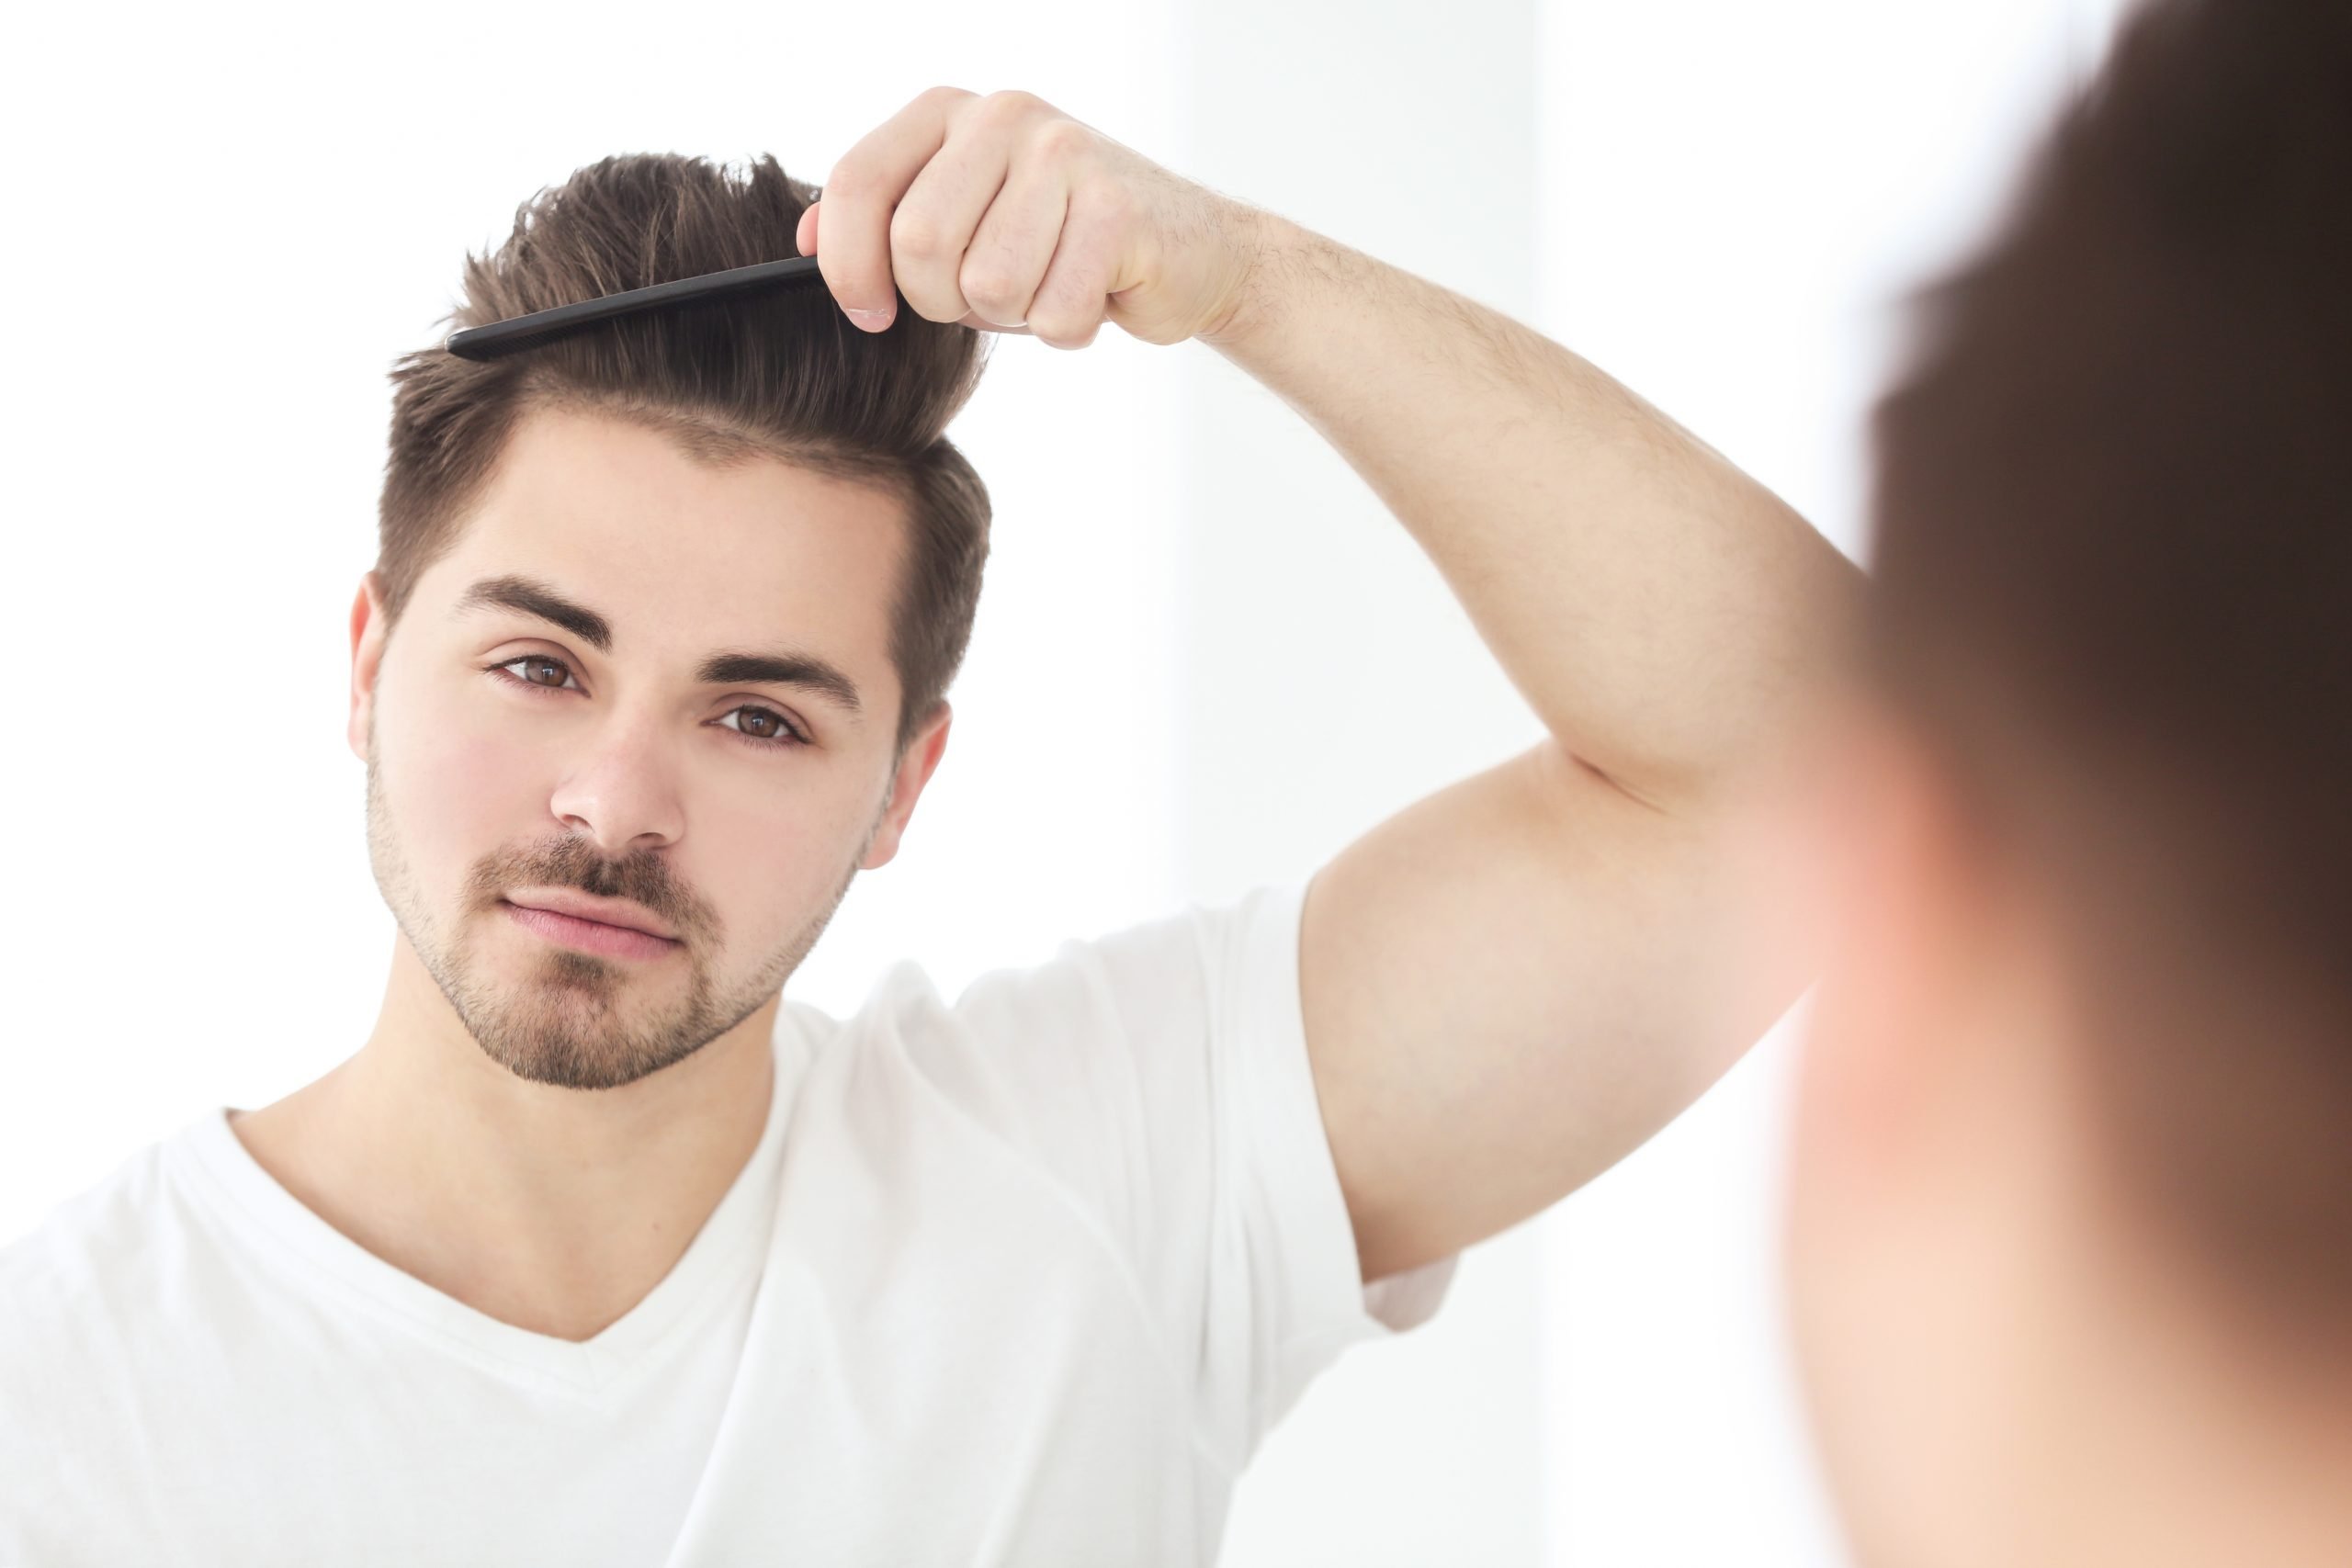 Does Minoxidil Work for Hair Growth?